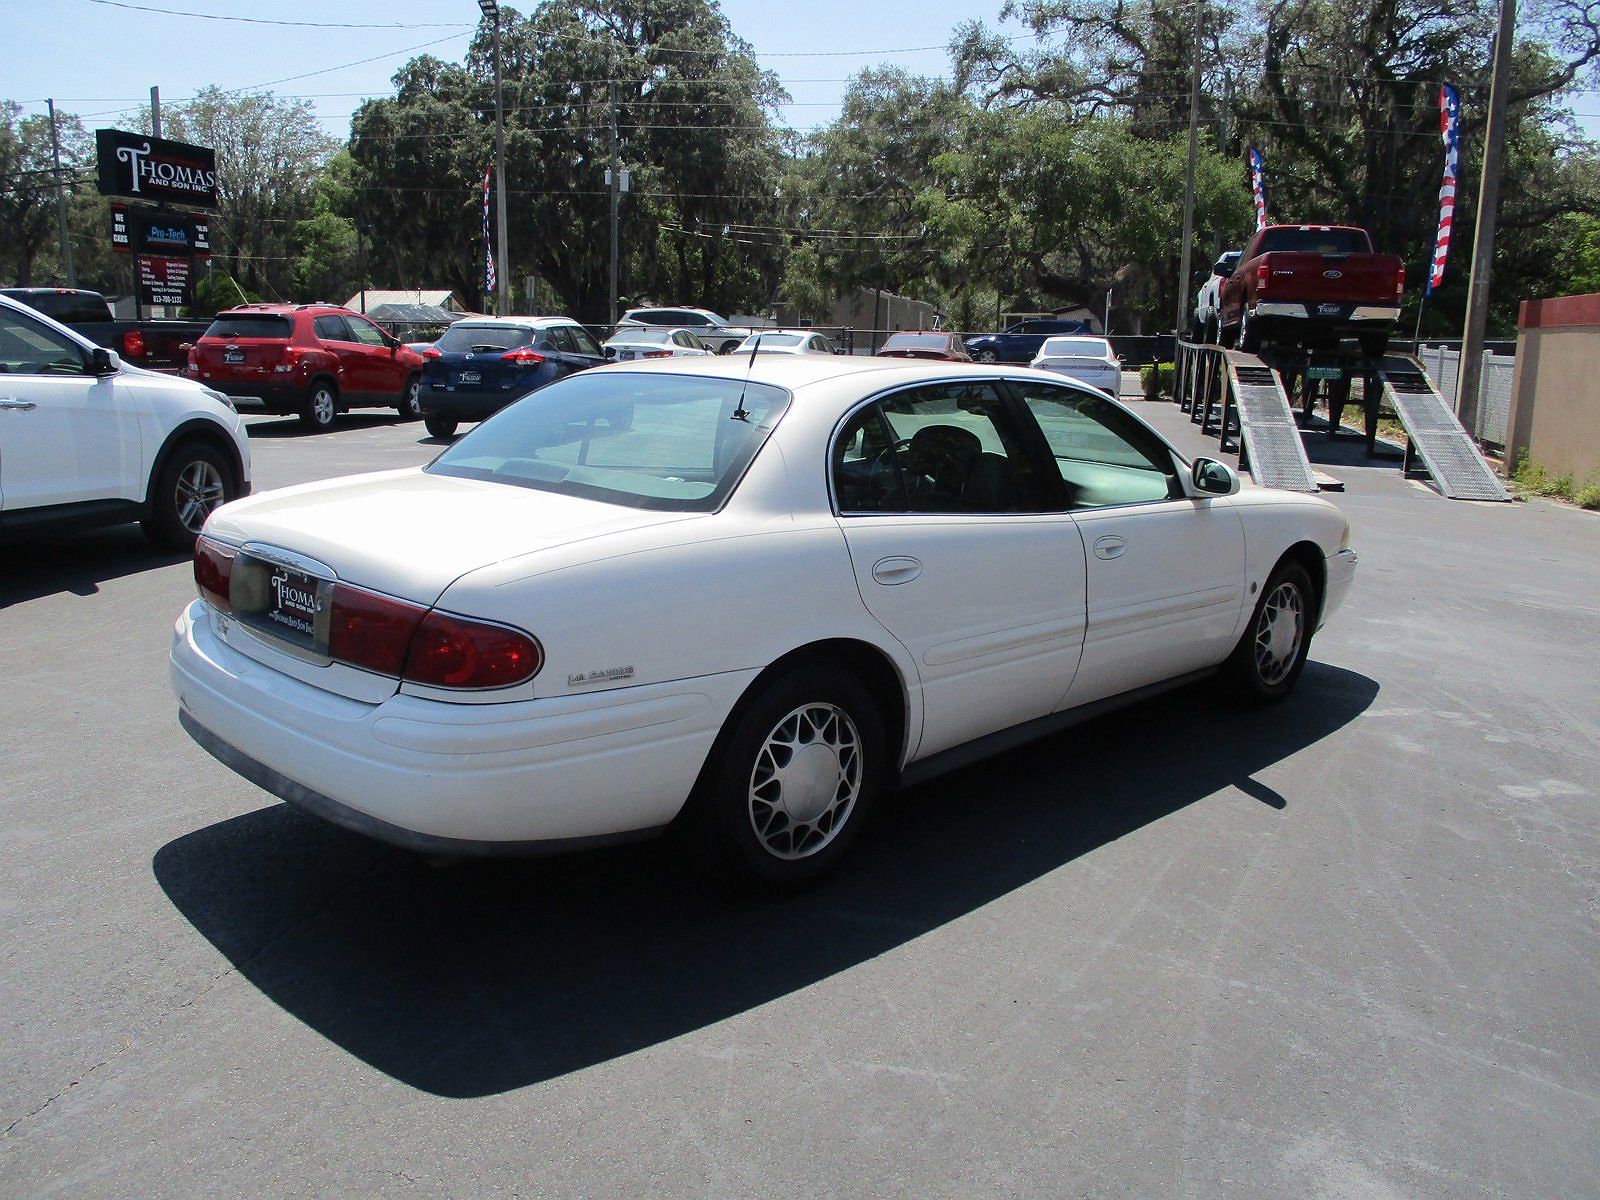 2002 Buick LeSabre Limited Edition image 4